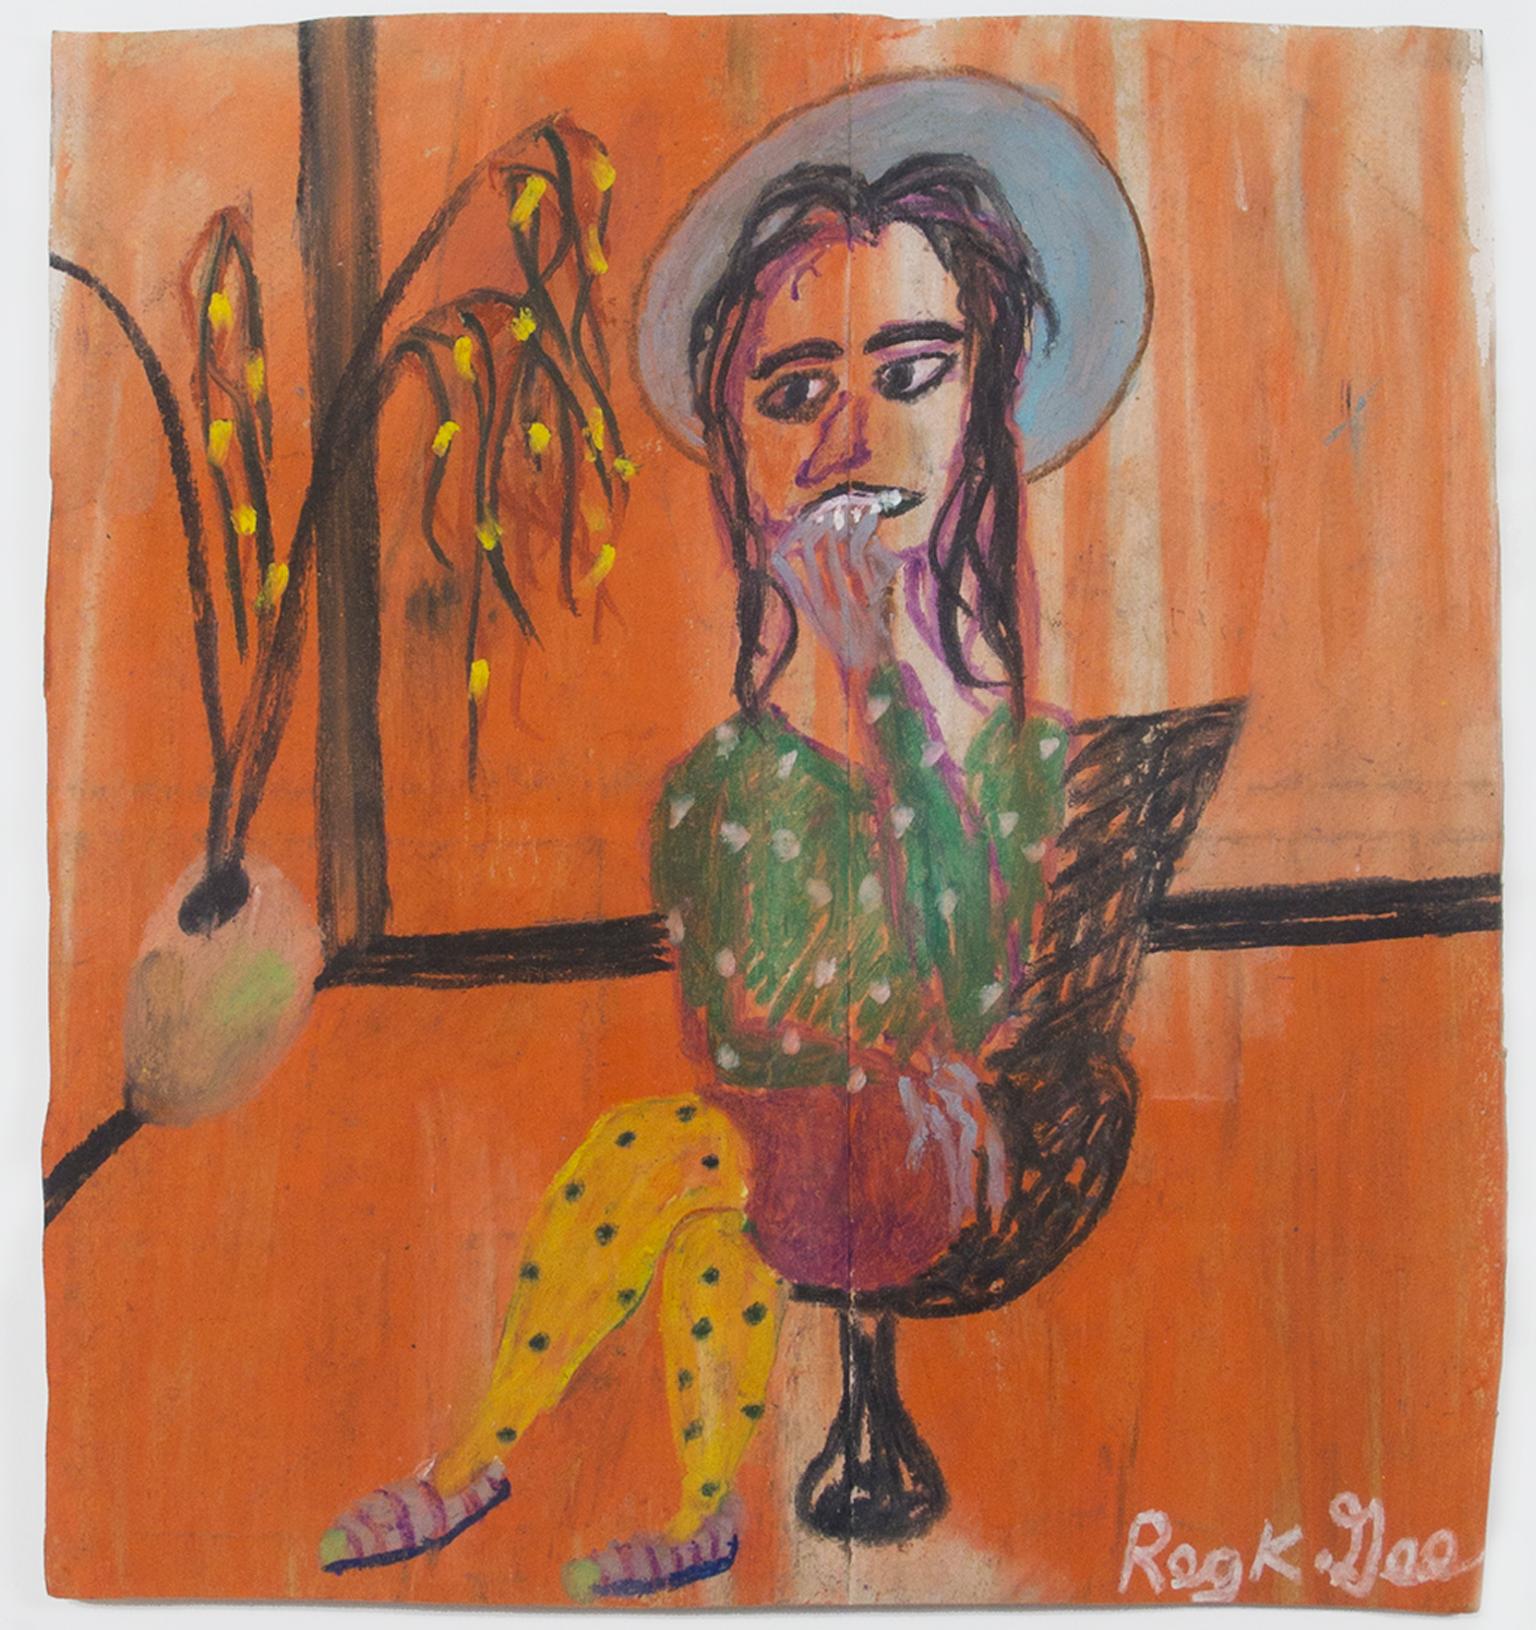 "Waiting Chitra," Pastel on Grocery Bag signed by Reginald K. Gee